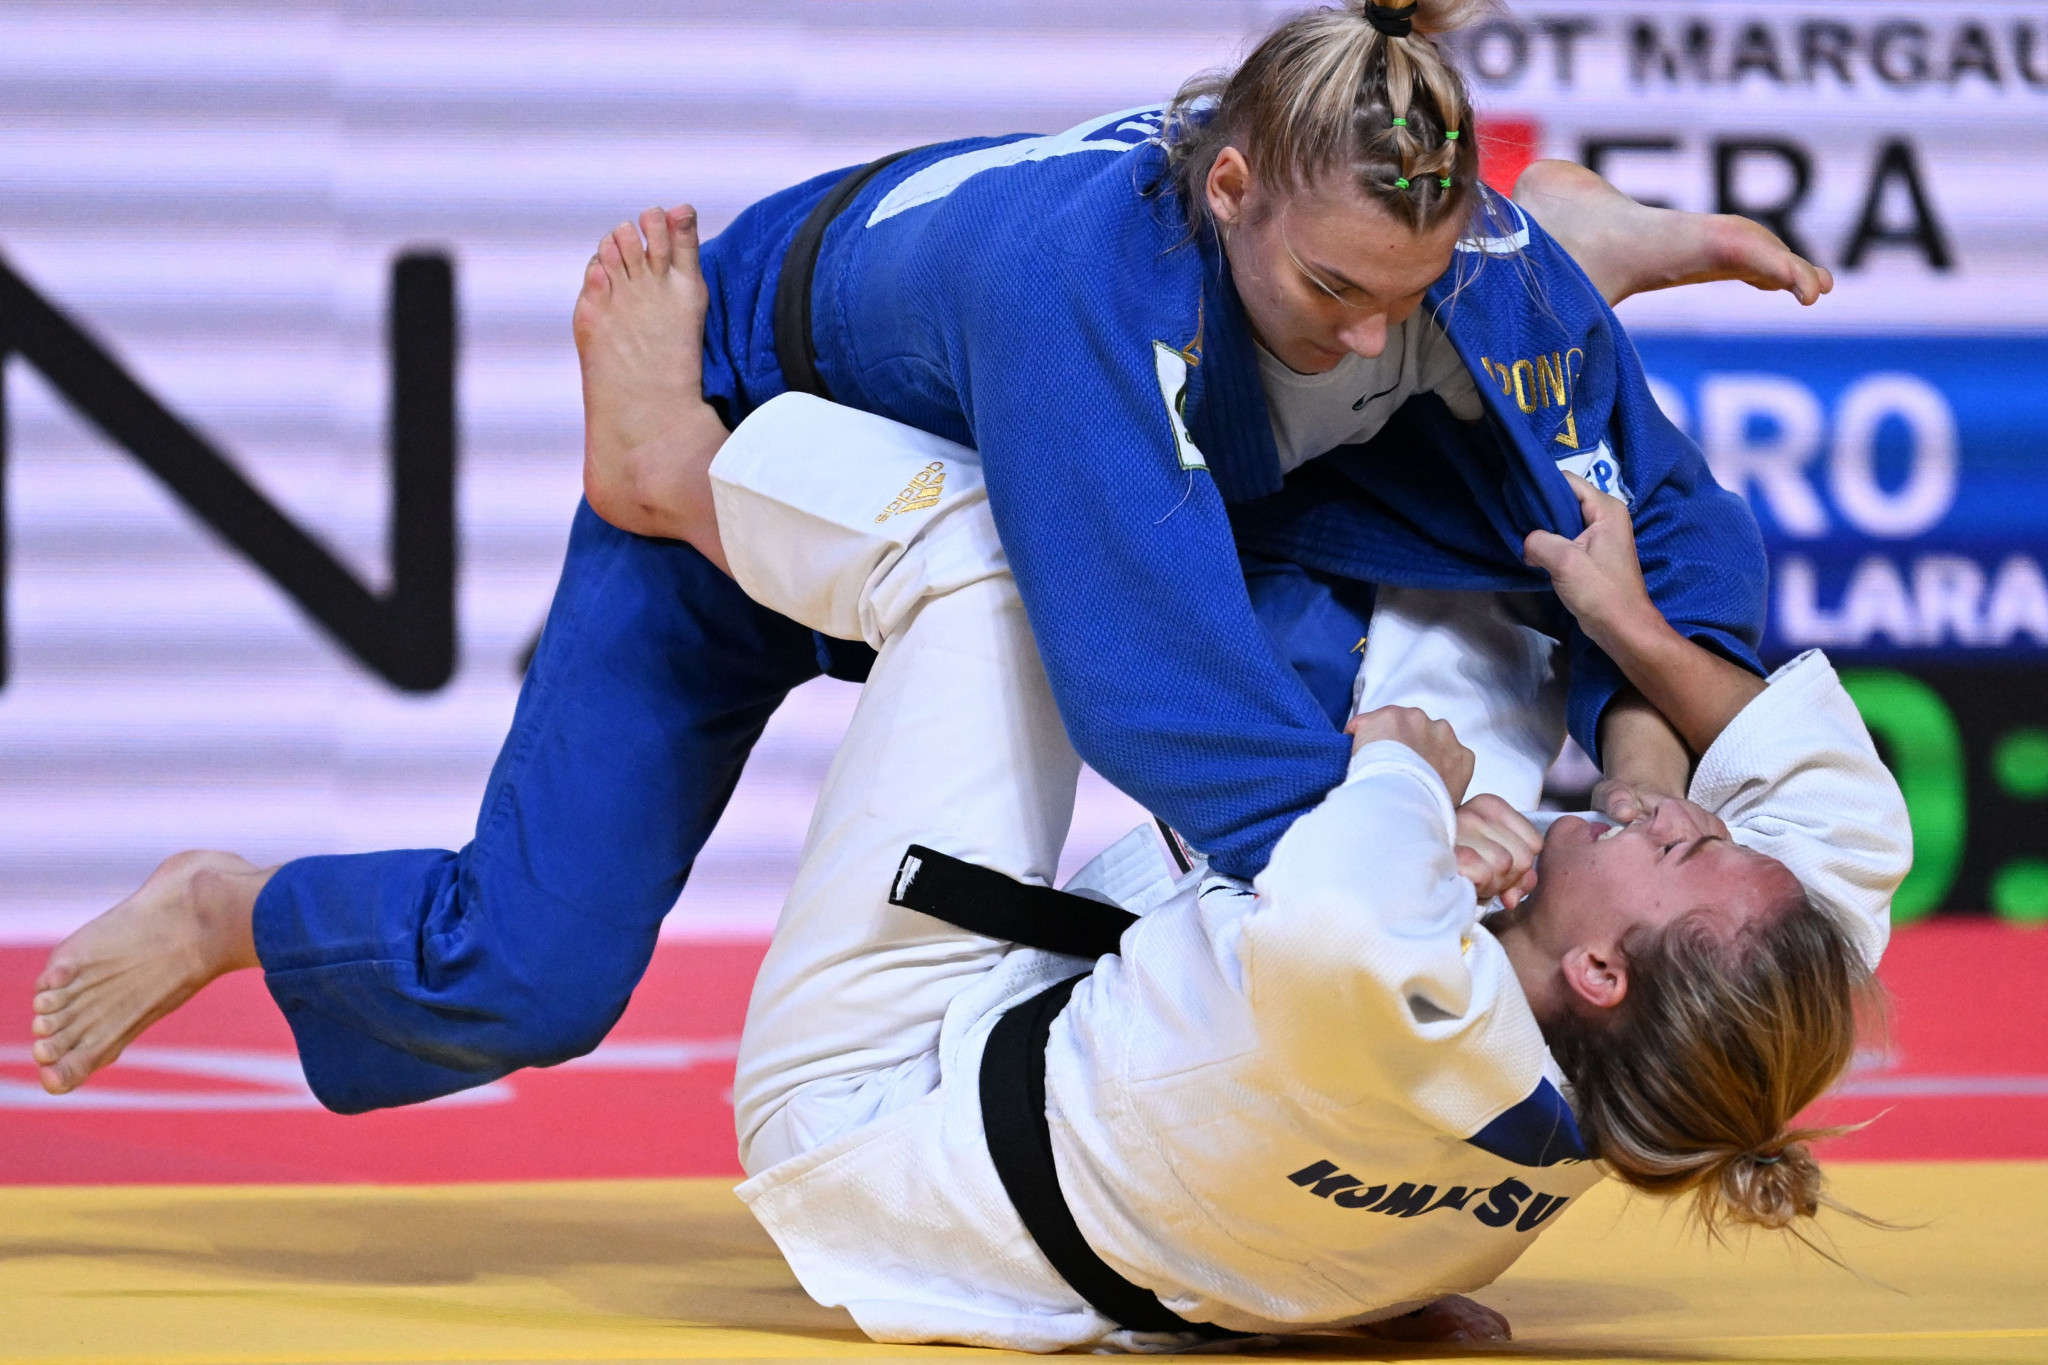 insidethegames is reporting LIVE from the World Judo Championships in Tashkent